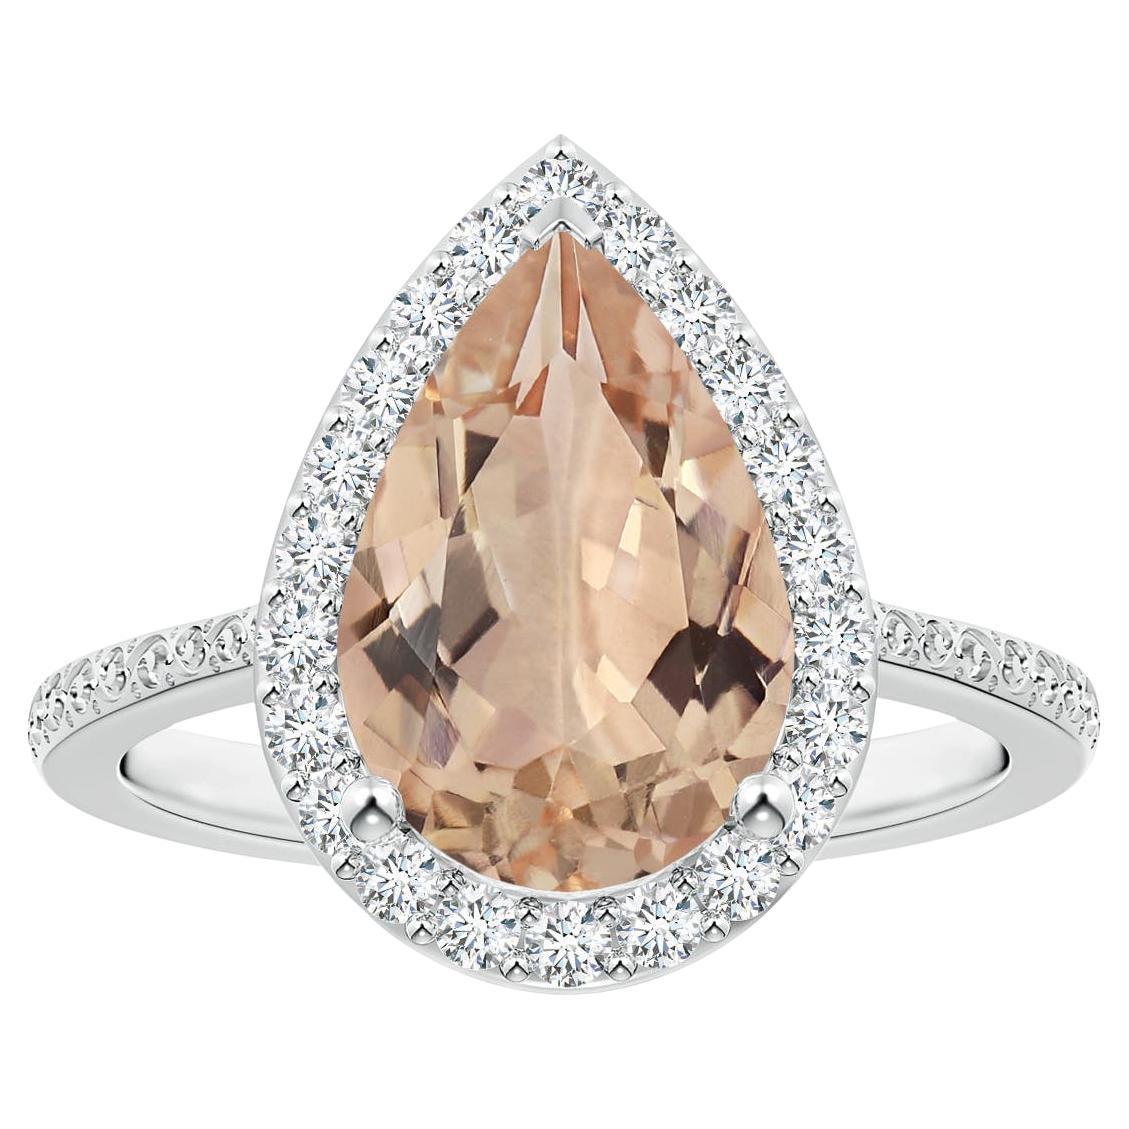 For Sale:  Angara Gia Certified Natural Pear-Shaped Morganite Halo Ring in White Gold